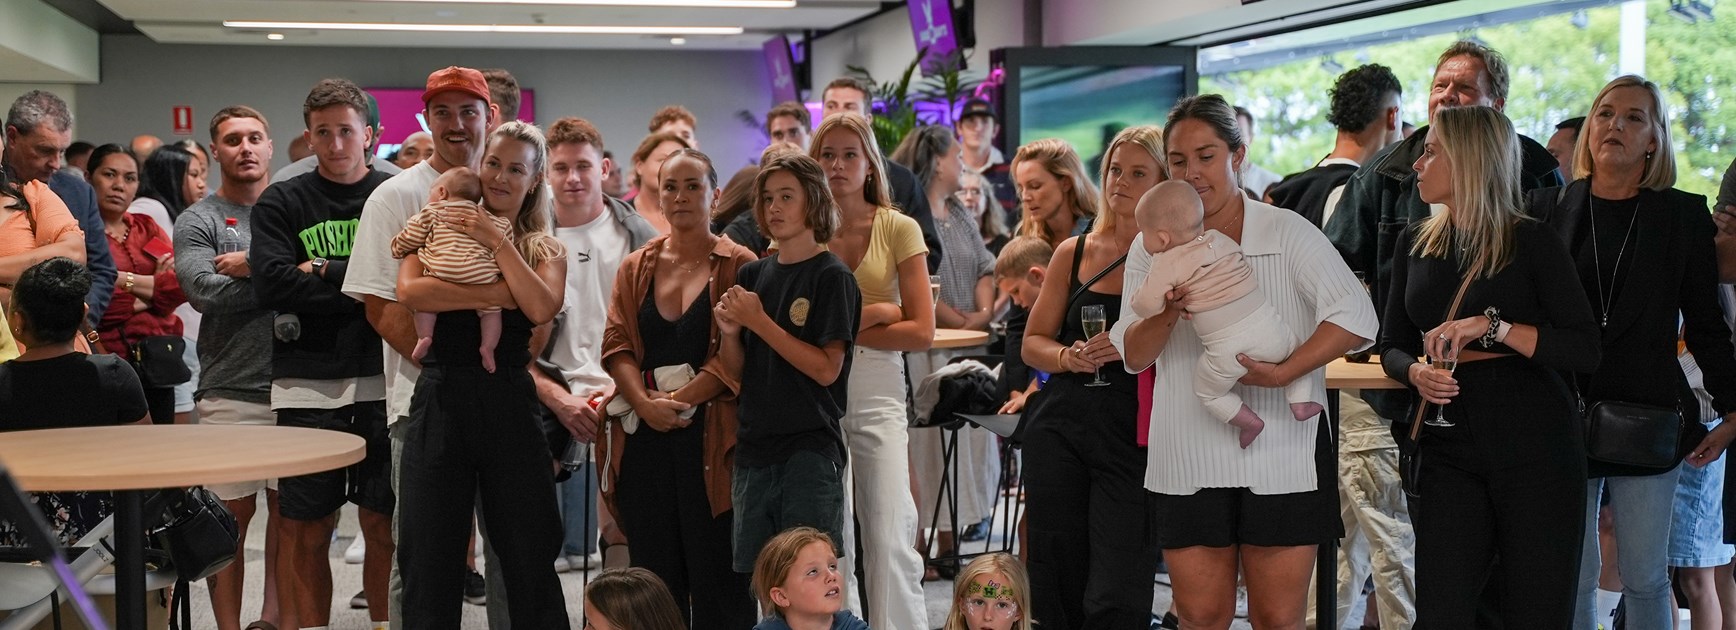 Eagle Hearts dinner connects Sea Eagles families